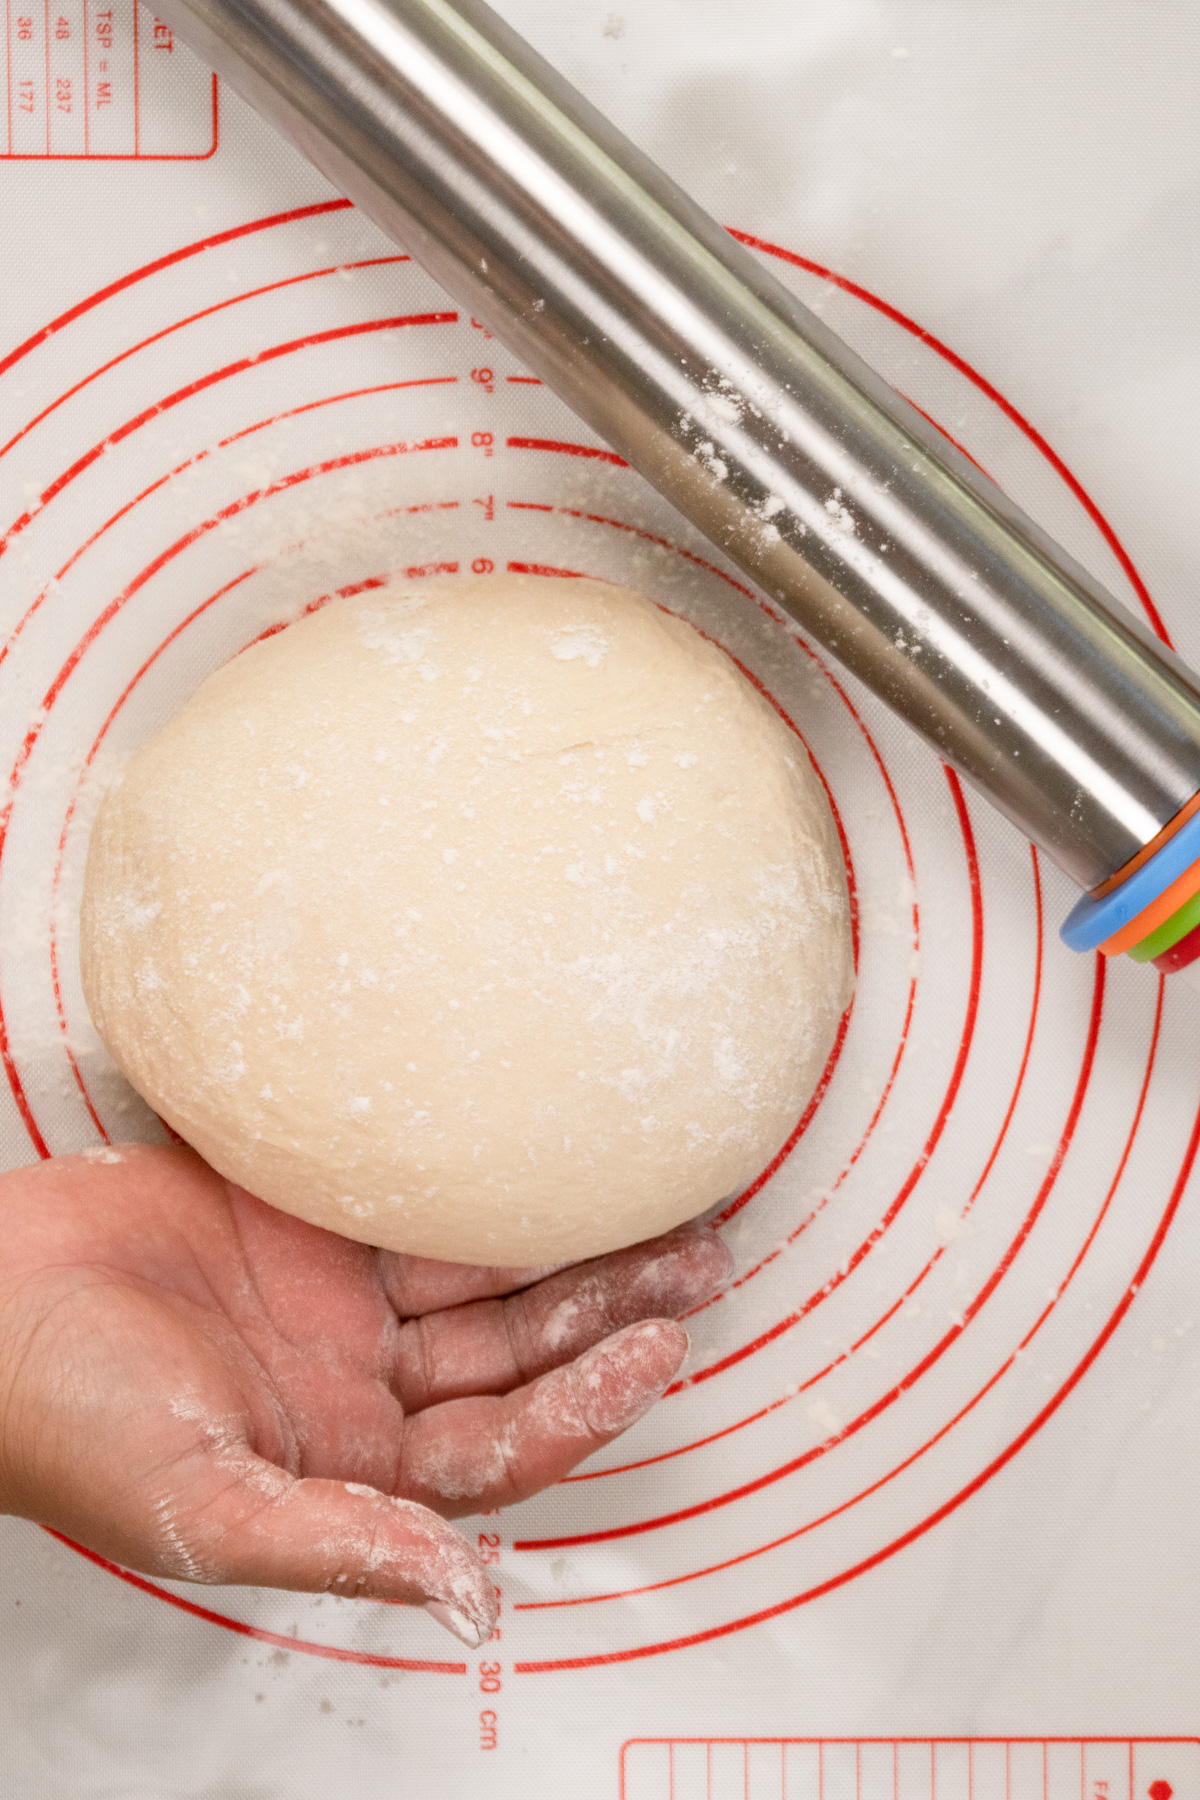 a dough ball held by a hand with a stainless steel rolling pin